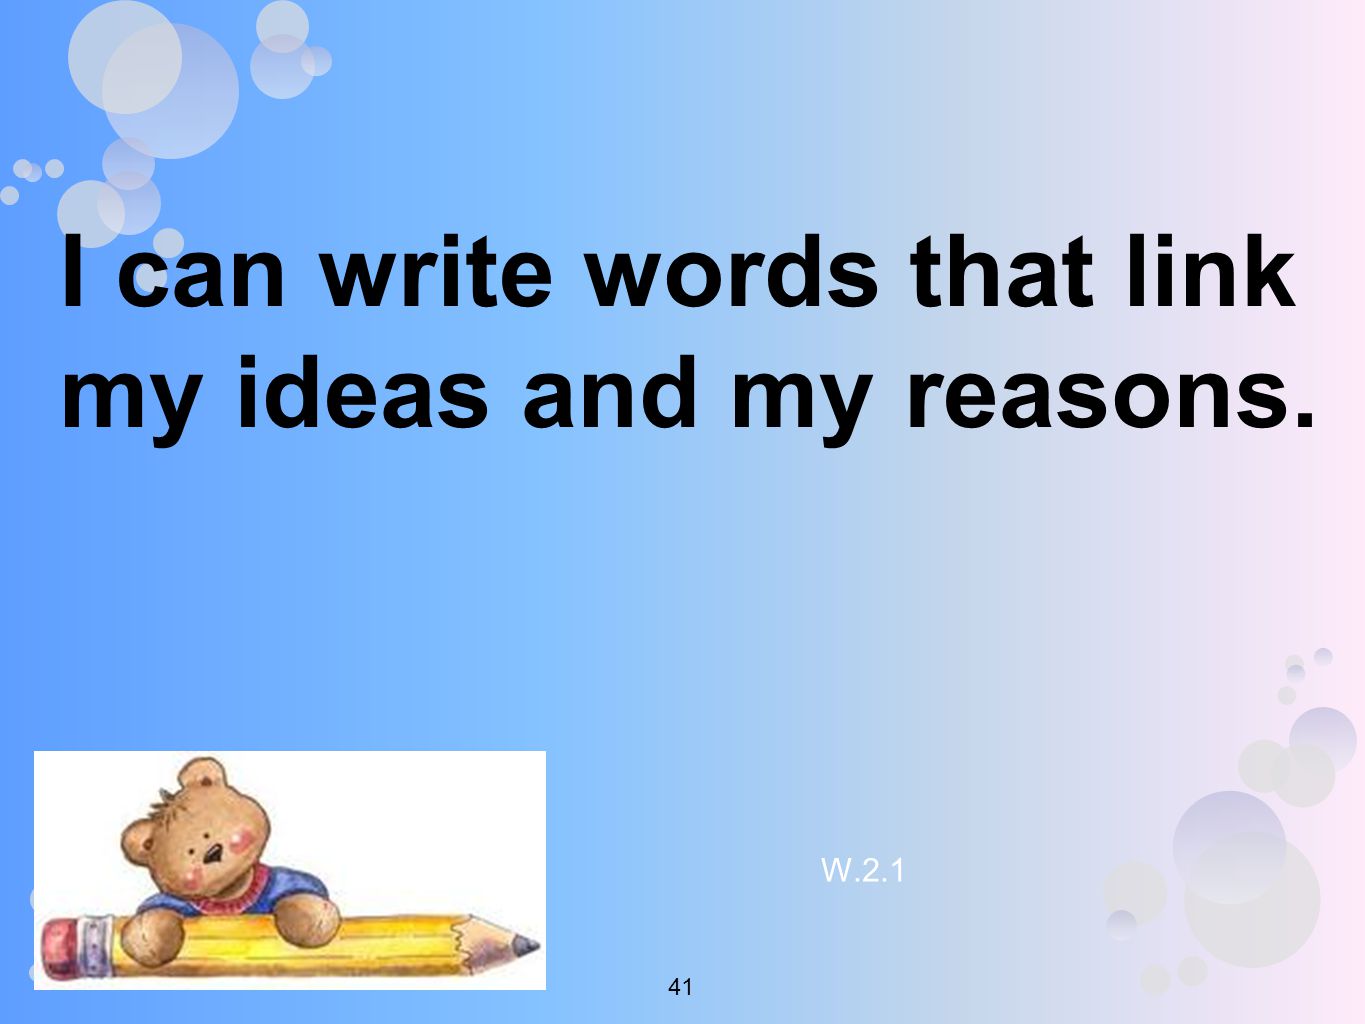 I can write words that link my ideas and my reasons. W